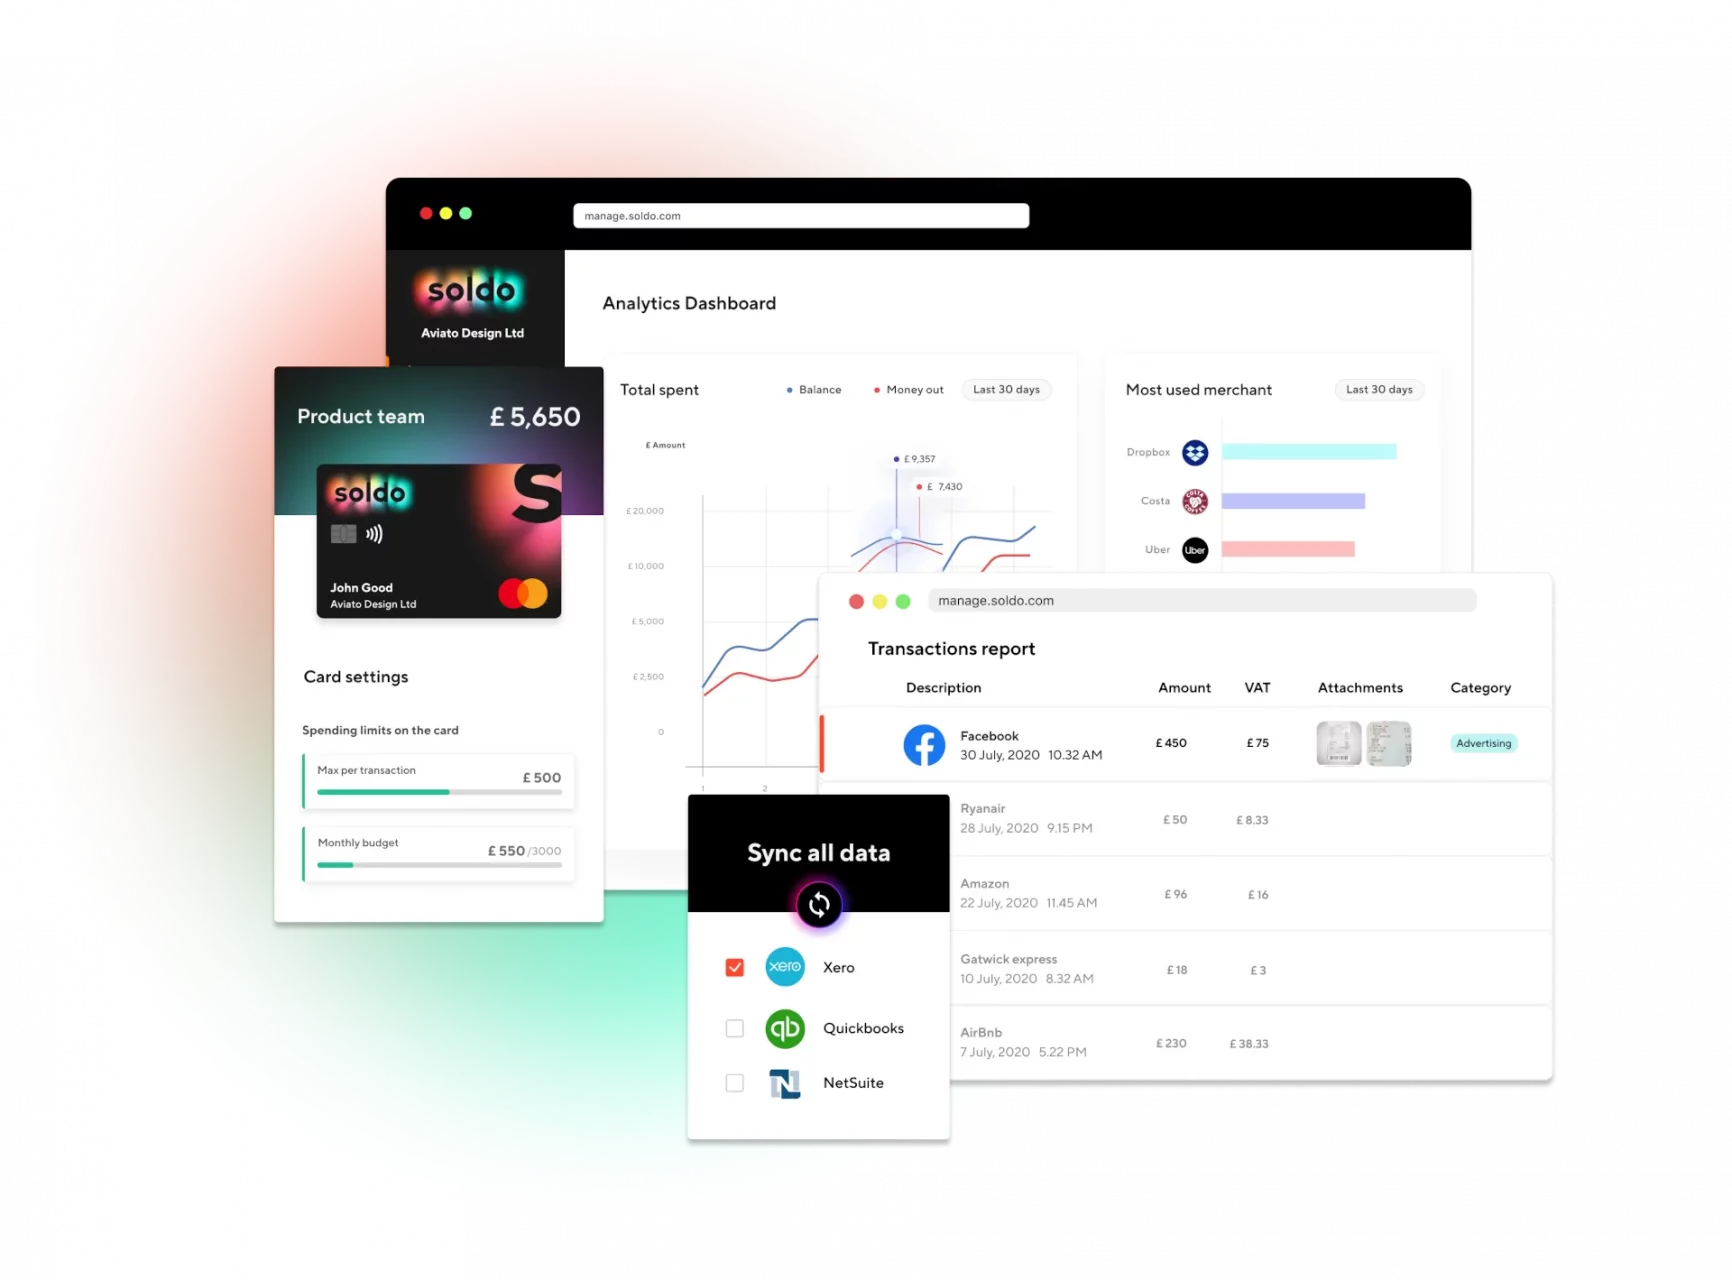 prepaid card analytics dashboard and mobile app view